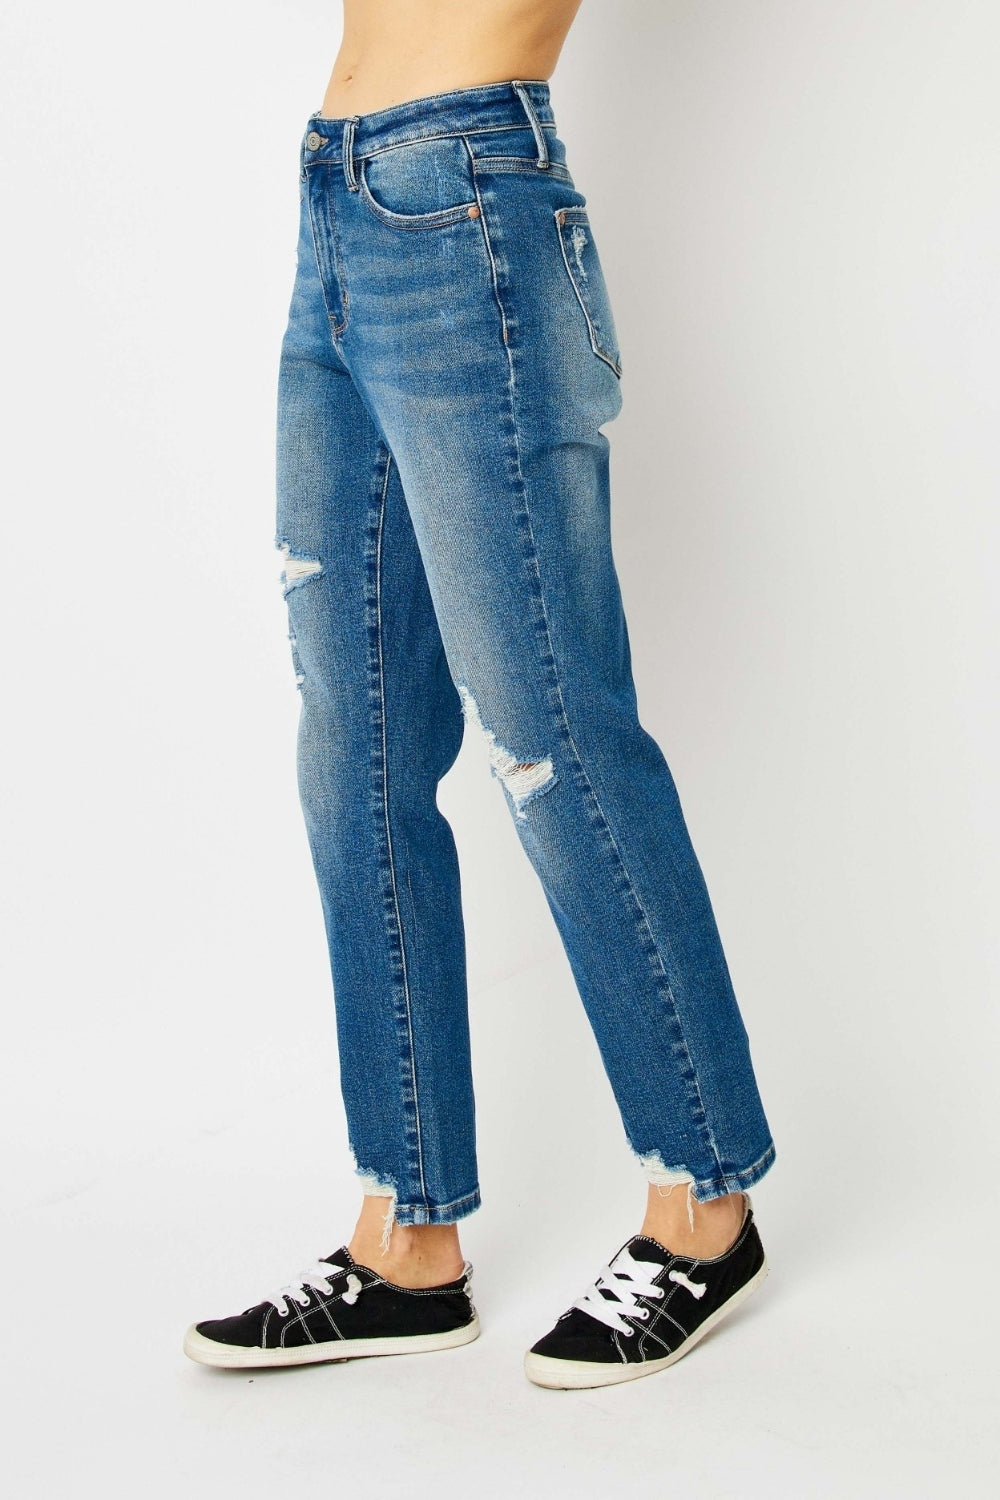 Queen of Hearts Distressed Boyfriend Fit Jeans